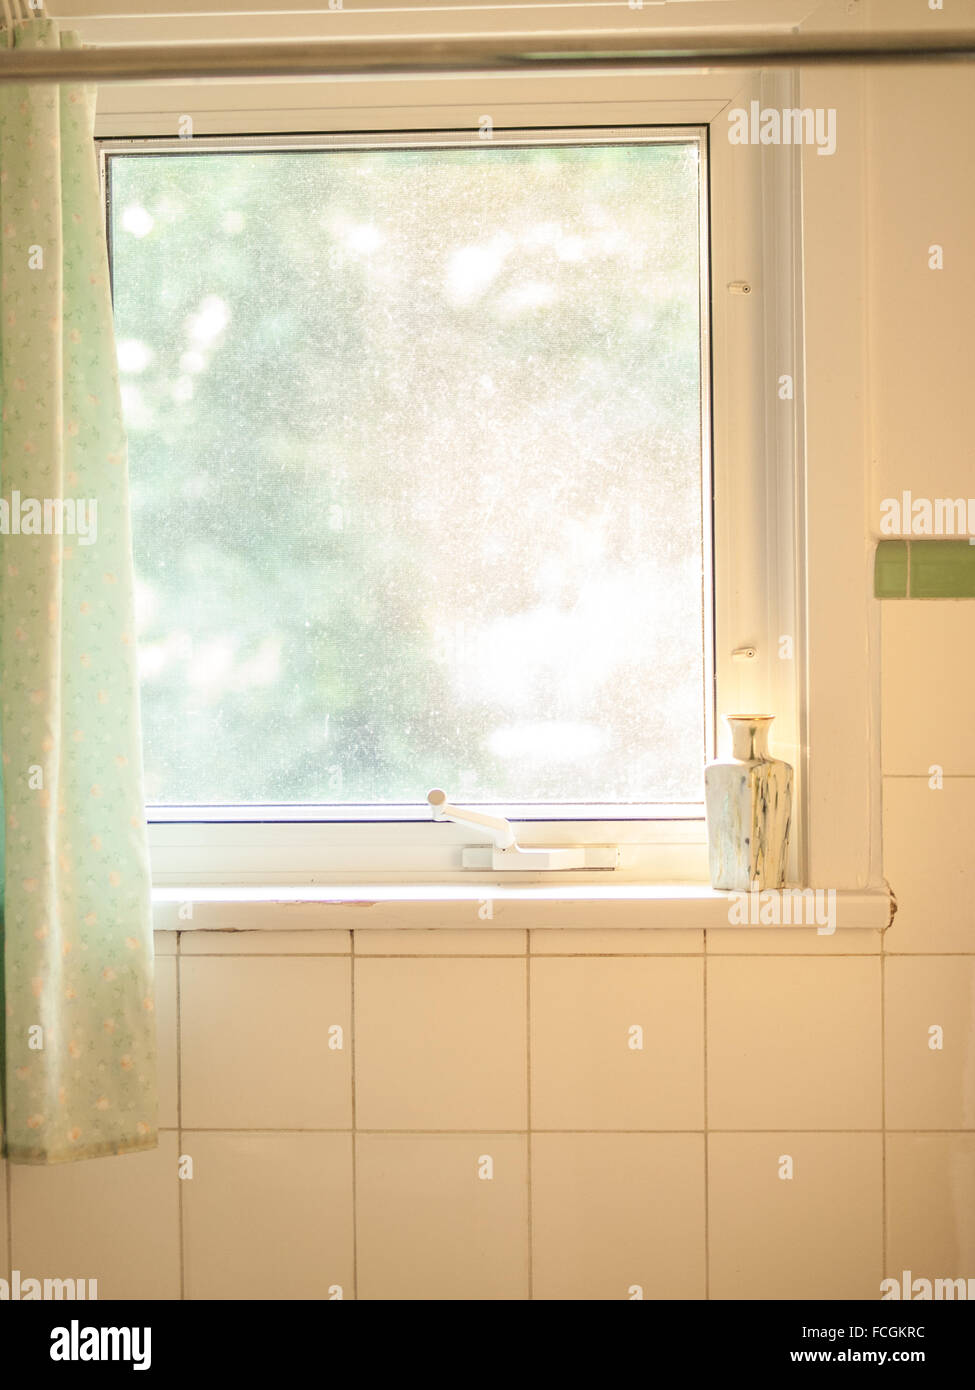 Bright single pane window surrounded by white tiles in a shower stall in a residential home. Stock Photo